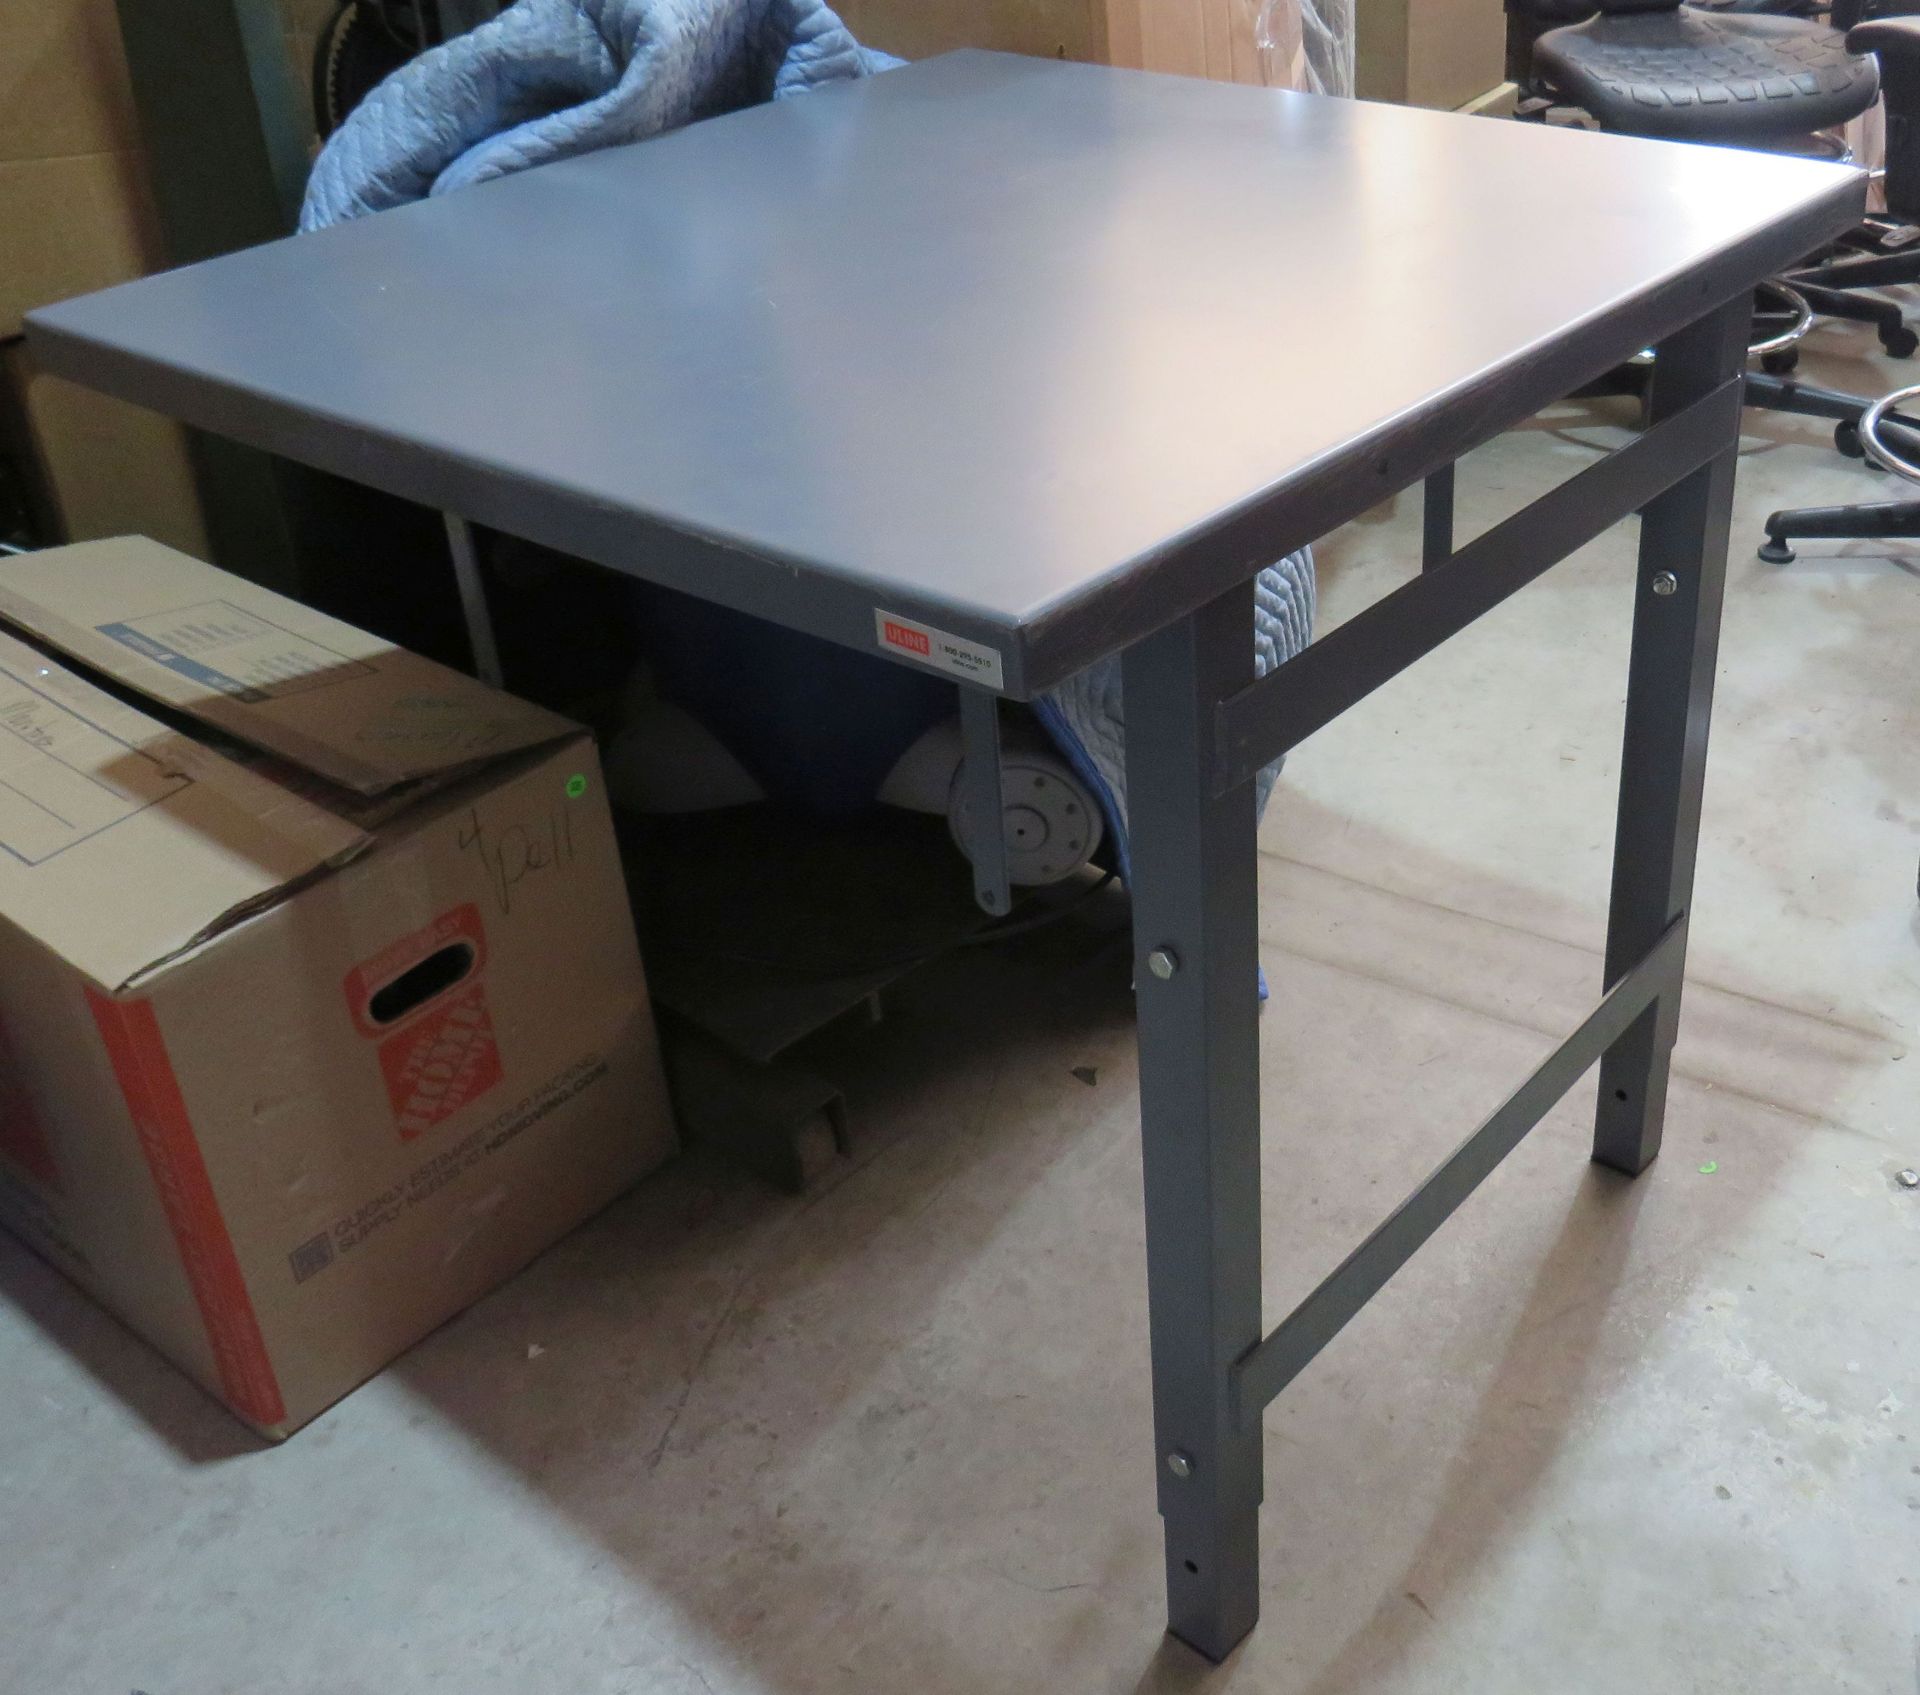 Steel work table extension 36x36